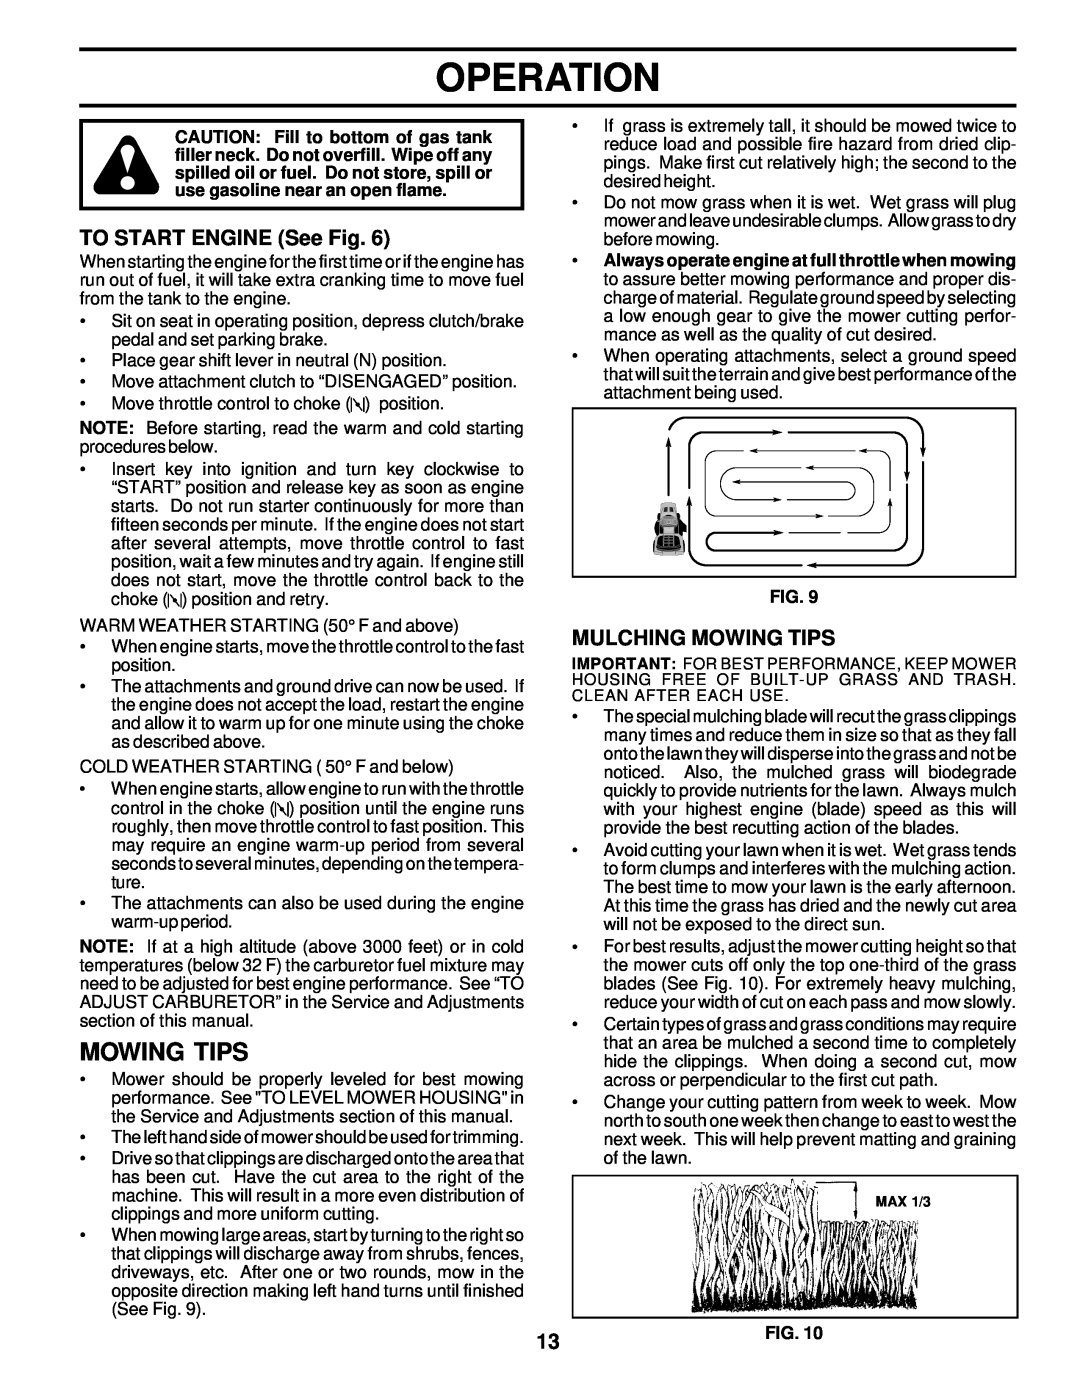 Poulan PRK17G42STB owner manual TO START ENGINE See Fig, Mulching Mowing Tips, Operation 